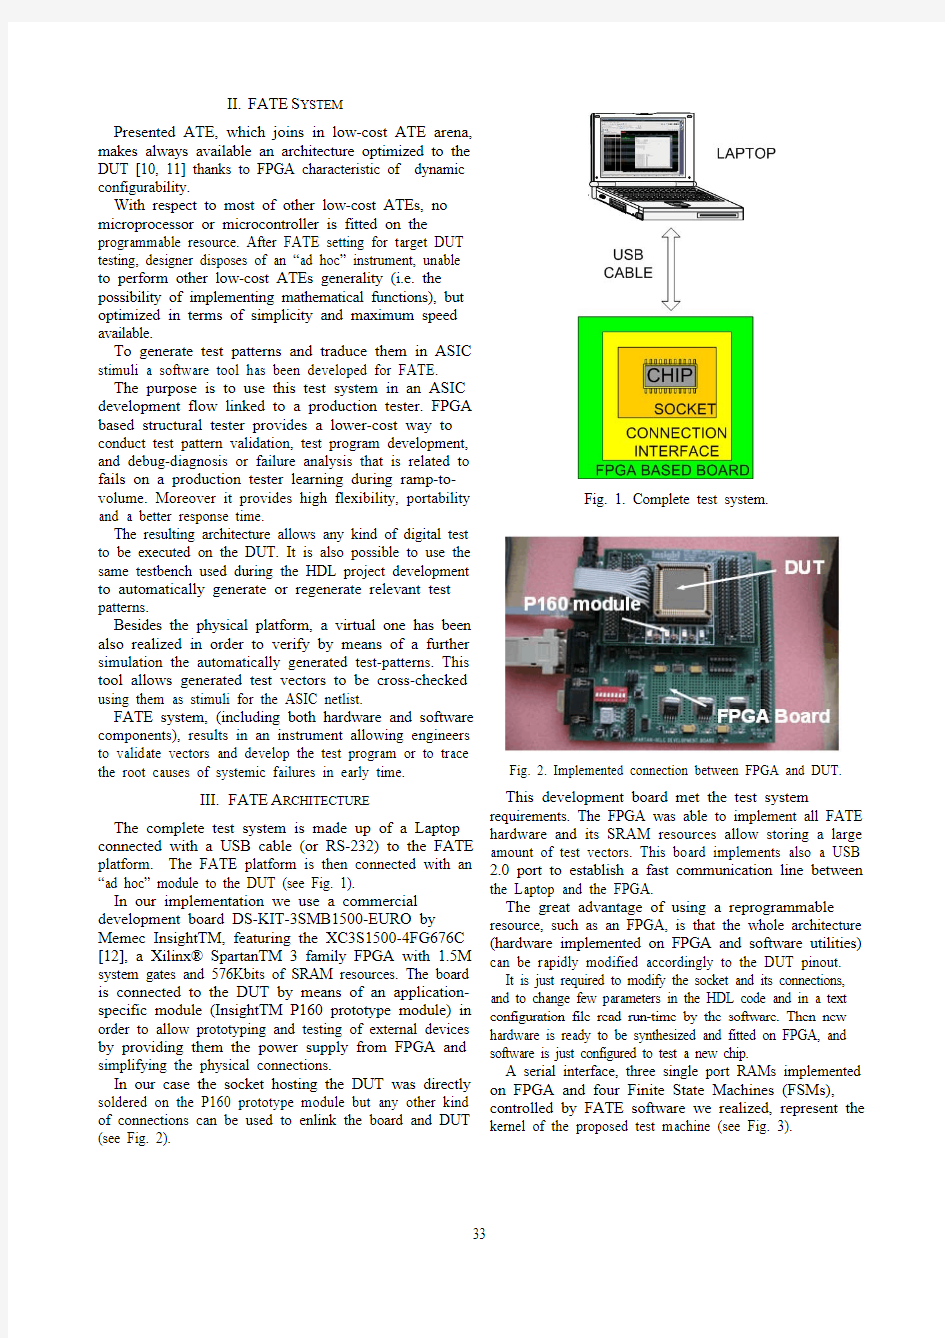 FPGA-based Low-cost Automatic Test Equipment for Digital Integrated Circuits